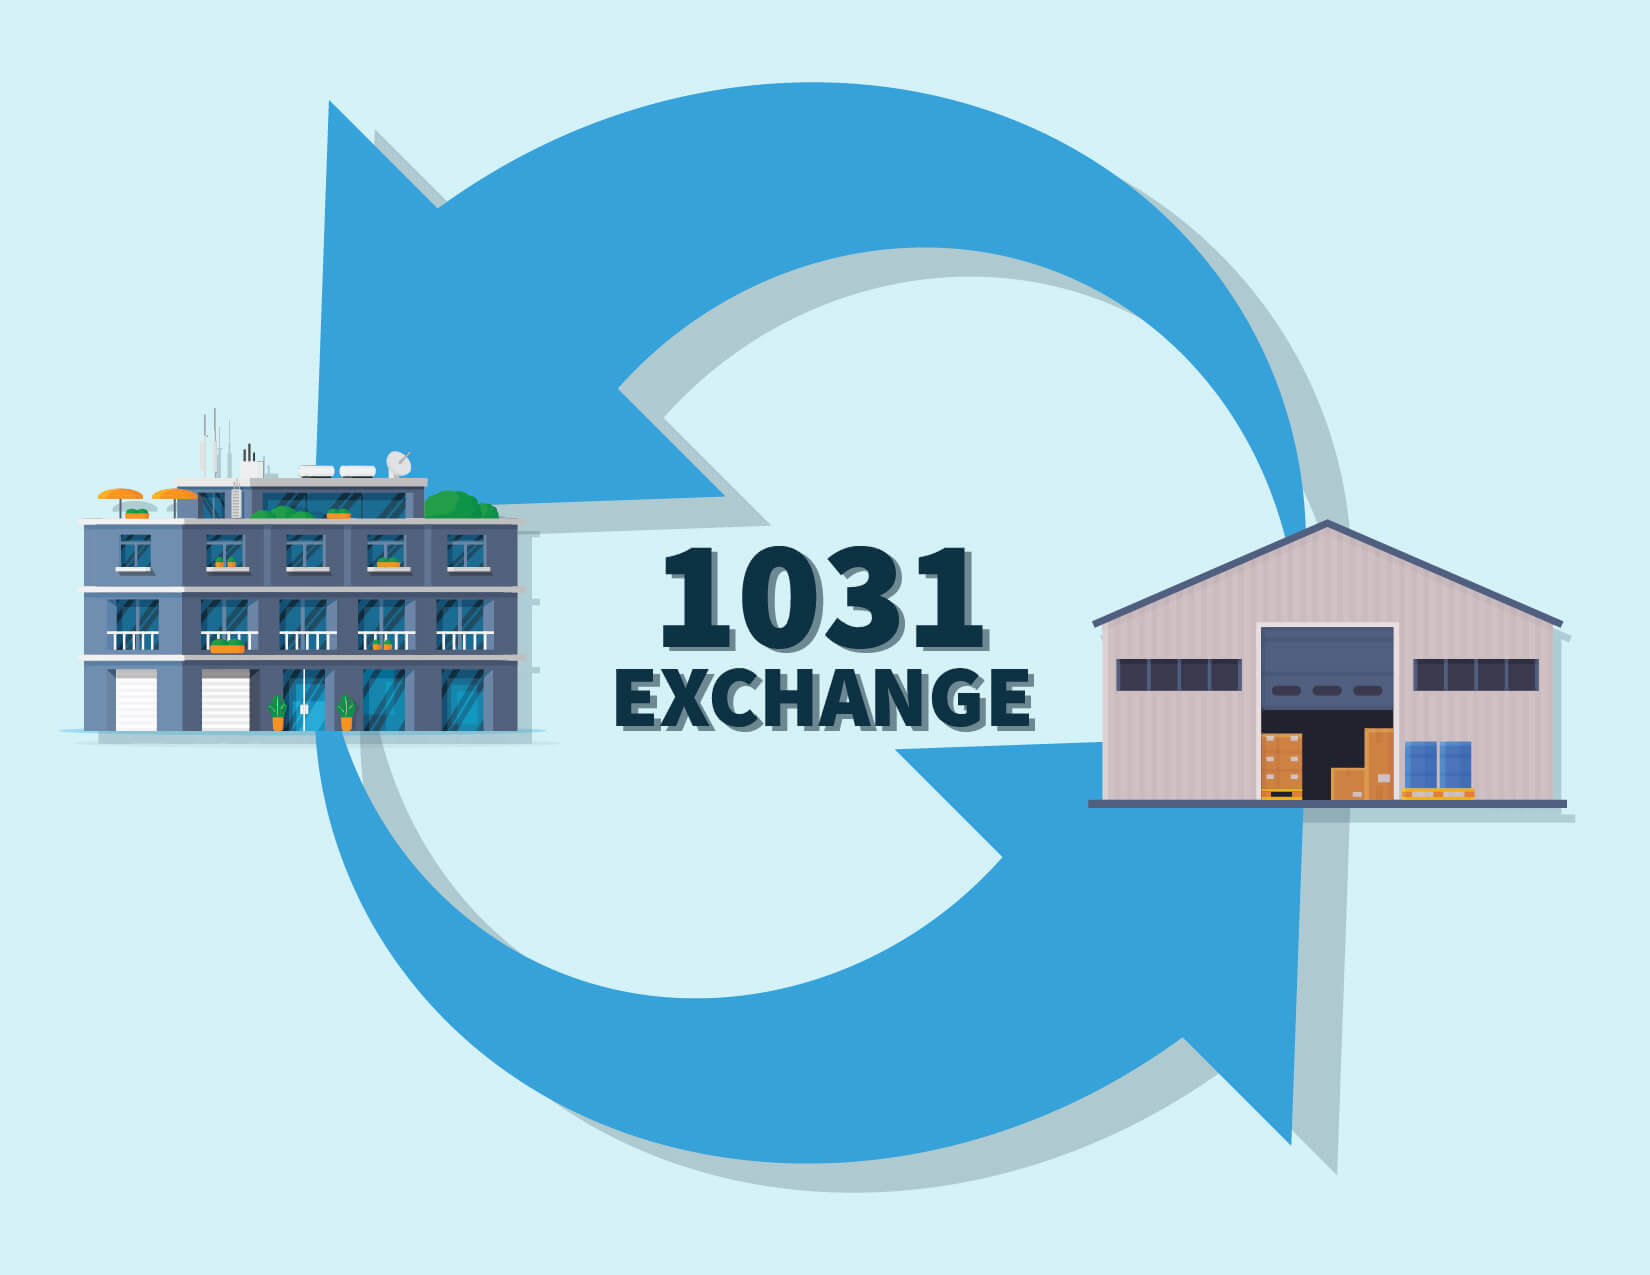 1031 Exchange graphic depicting the swap of an industrial building for a multifamily building